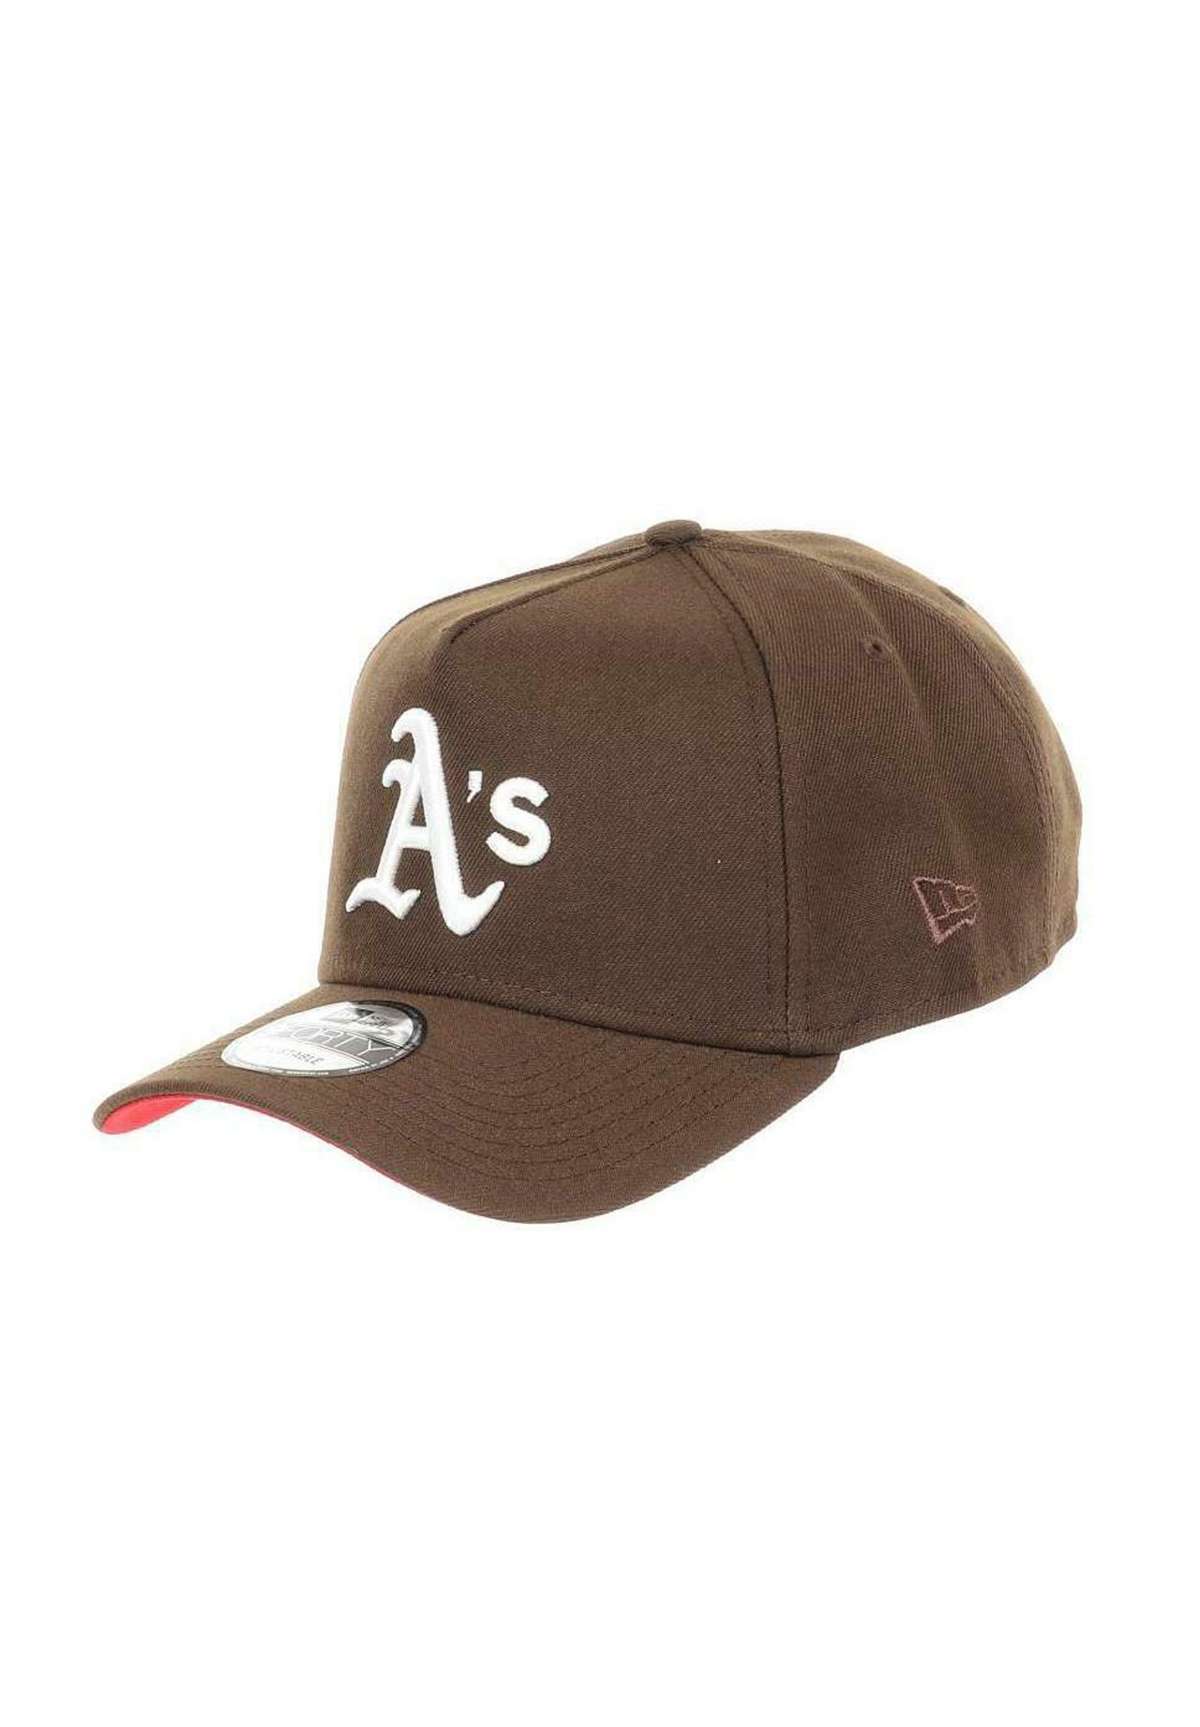 Кепка OAKLAND ATHLETICS MLB WORLD SERIES BATTLE OF THE BAY SIDEPATCH WALNUT 9FORTY A-FRAME SNAPBACK